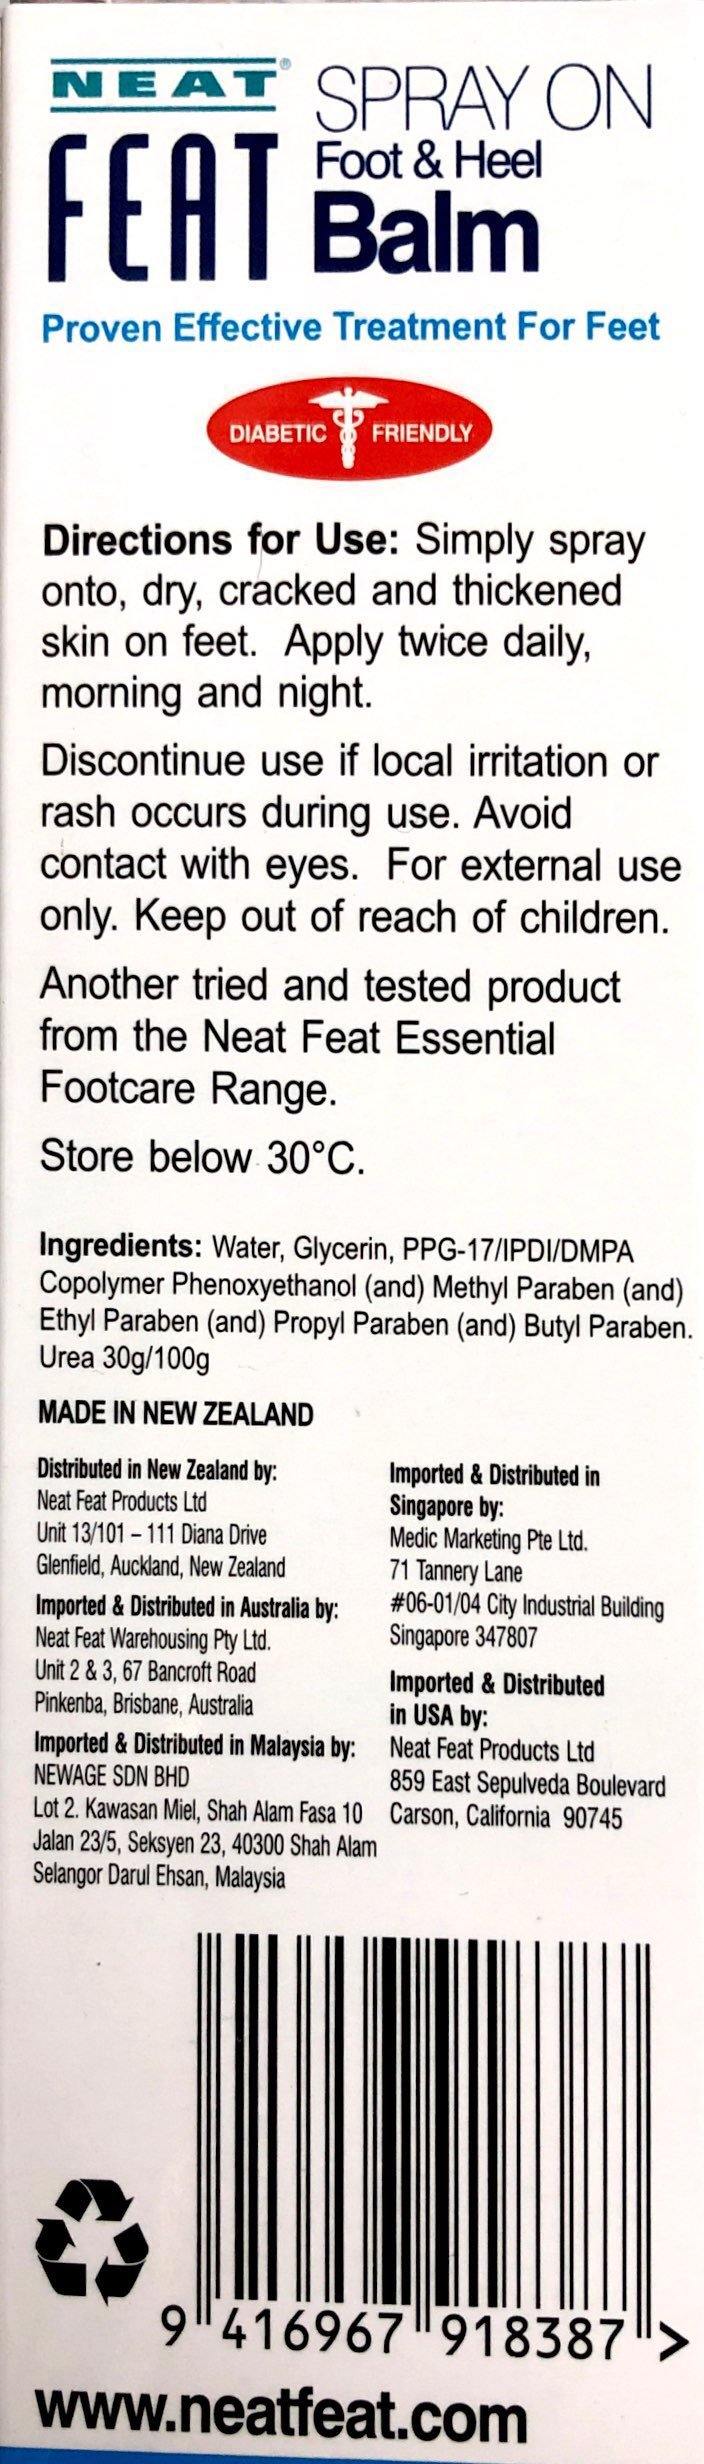 Neat Feat Foot and Heel Balm Spray For Dry Cracked Heels &amp; Feet 125ml